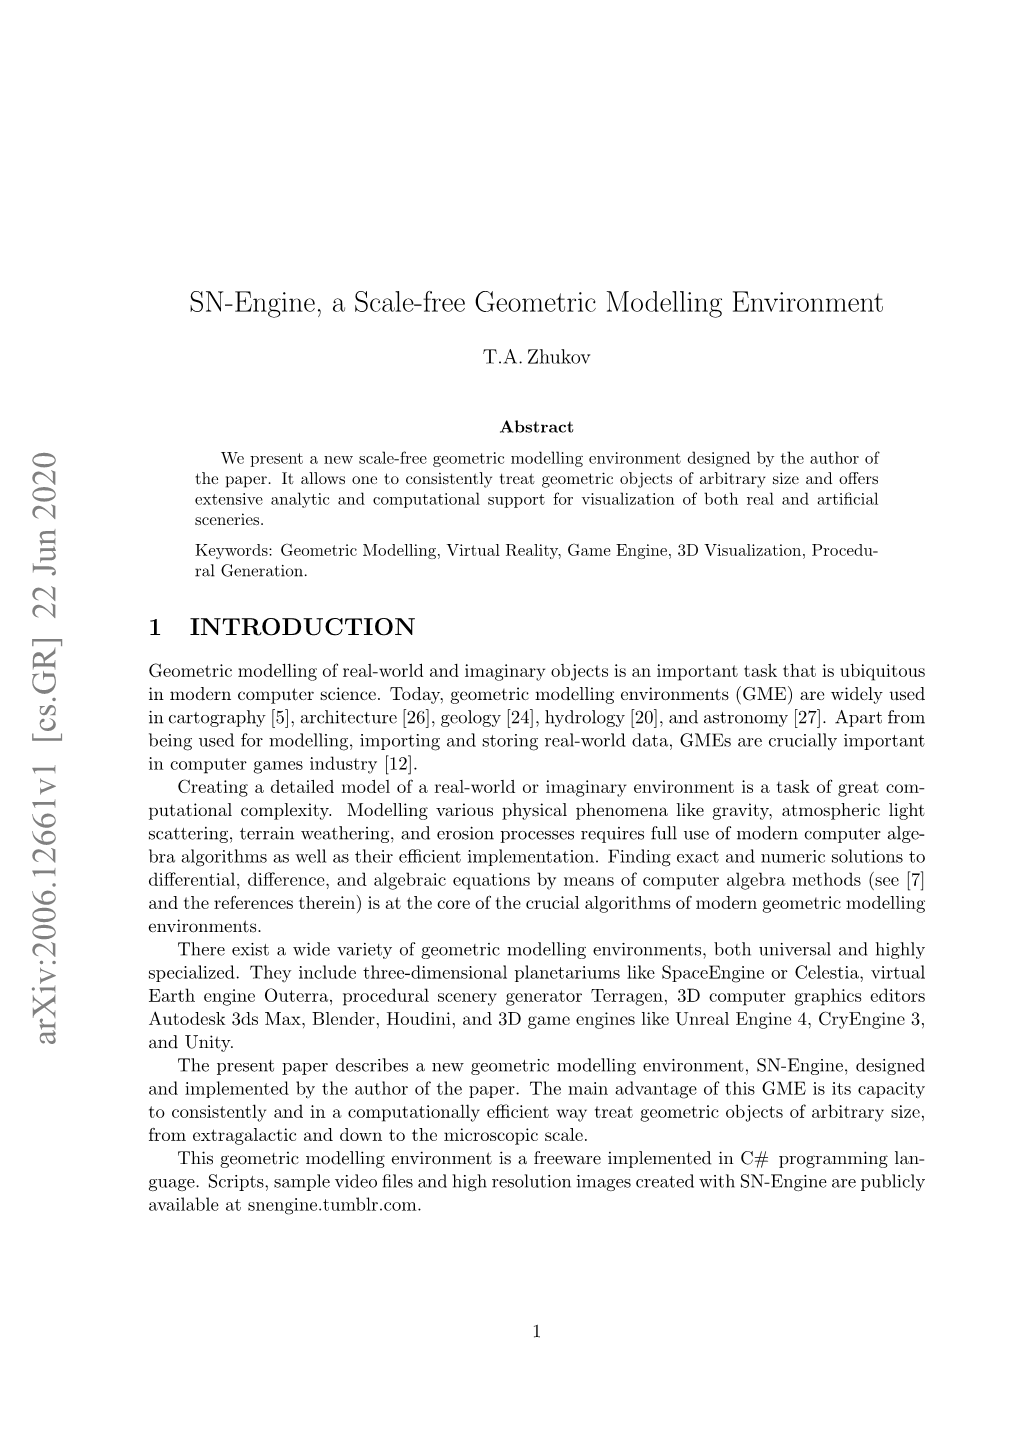 SN-Engine, a Scale-Free Geometric Modelling Environment